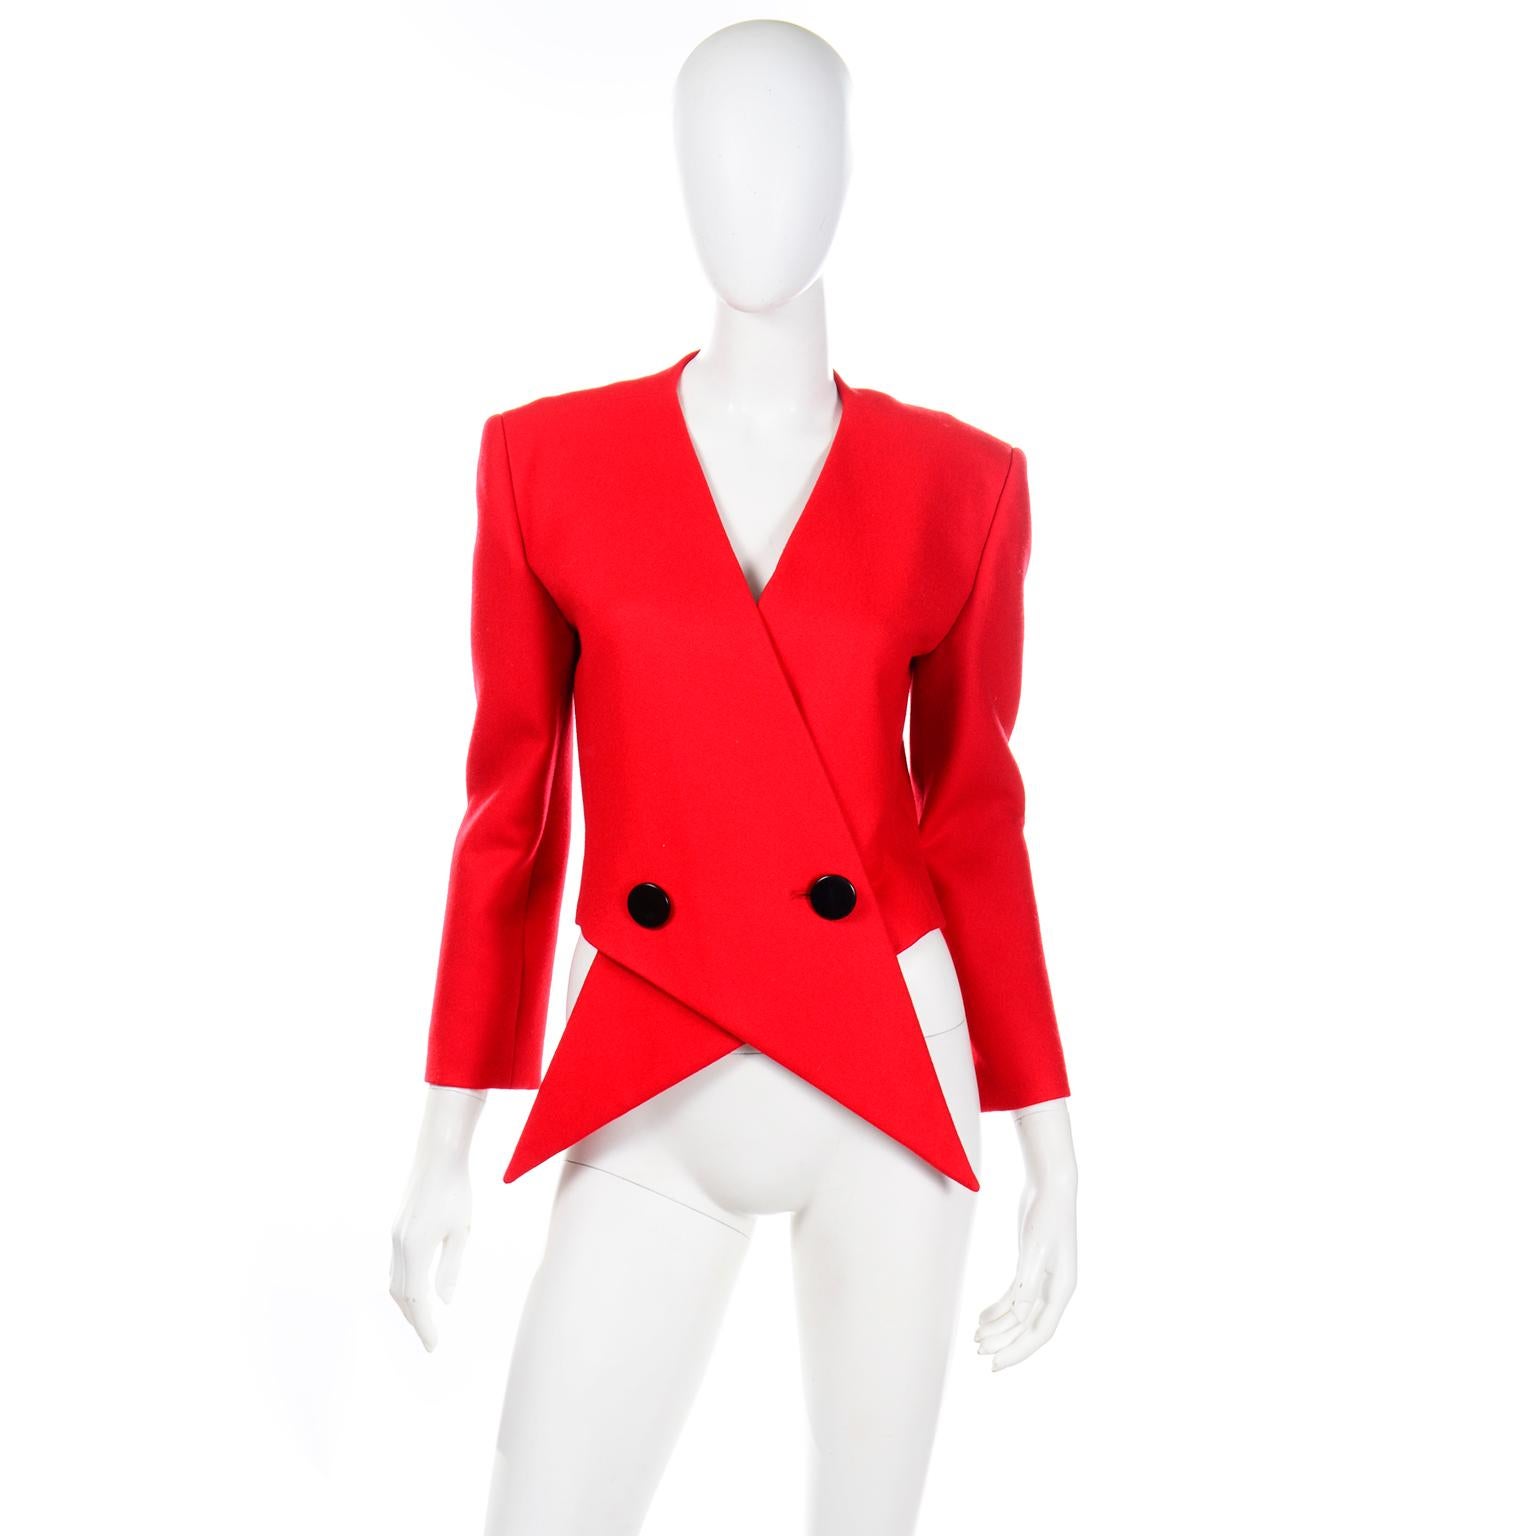 This is such an incredible,  unique avant garde jacket created by Pierre Cardin. This fabulous wool jacket is double breasted with two large black buttons in front that attach to the dramatic criss-crossing pointed front hem pieces. This creates a